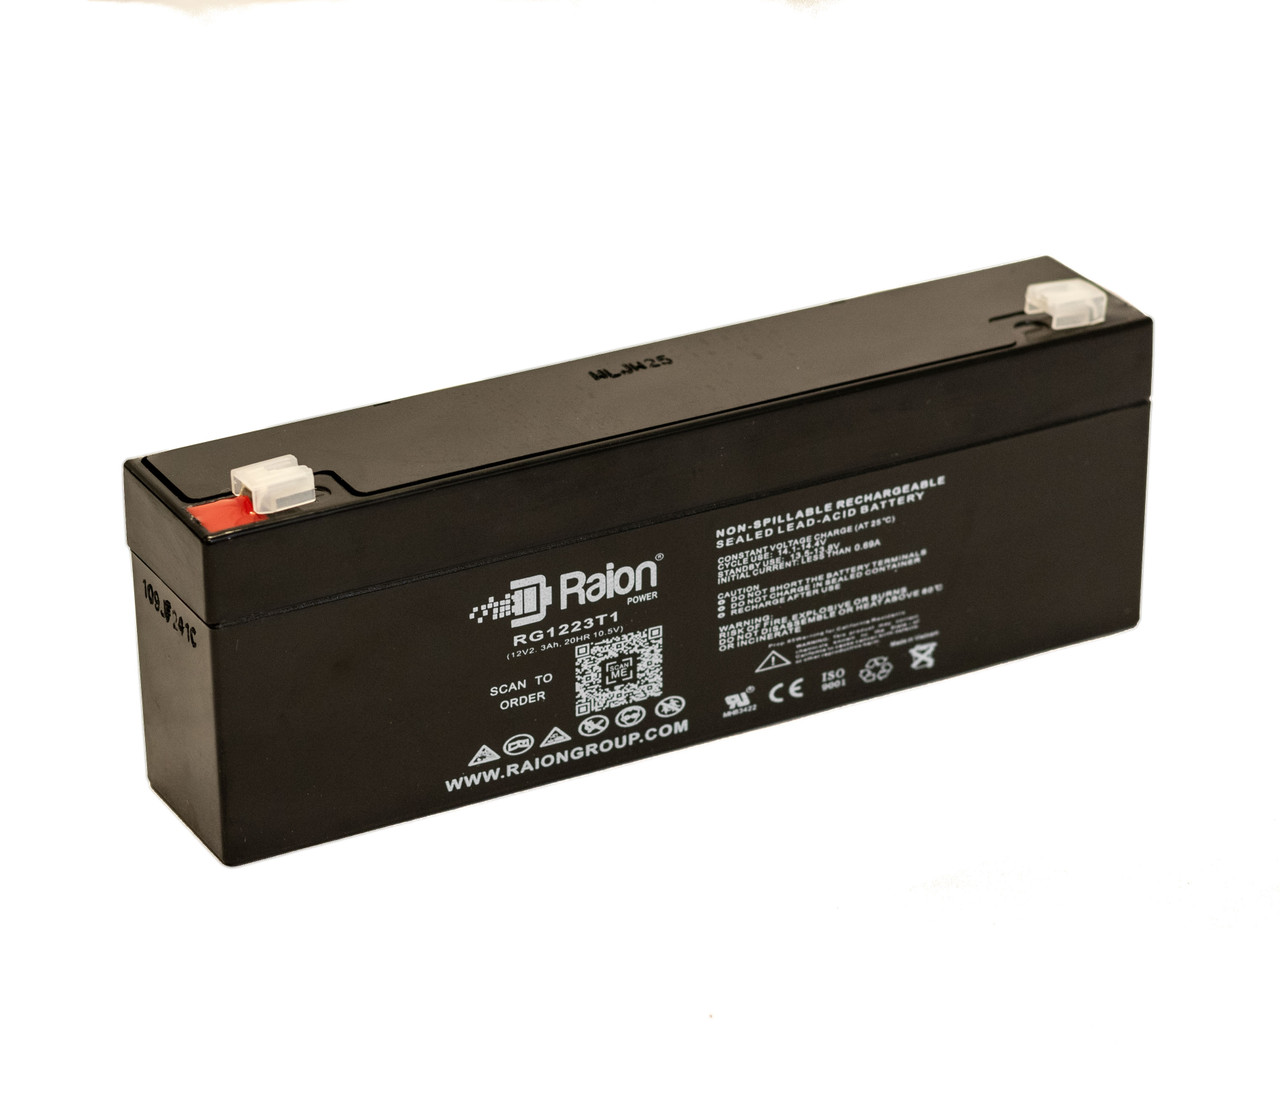 Raion Power RG1223T1 Replacement Battery for UPLUS US12-2.3